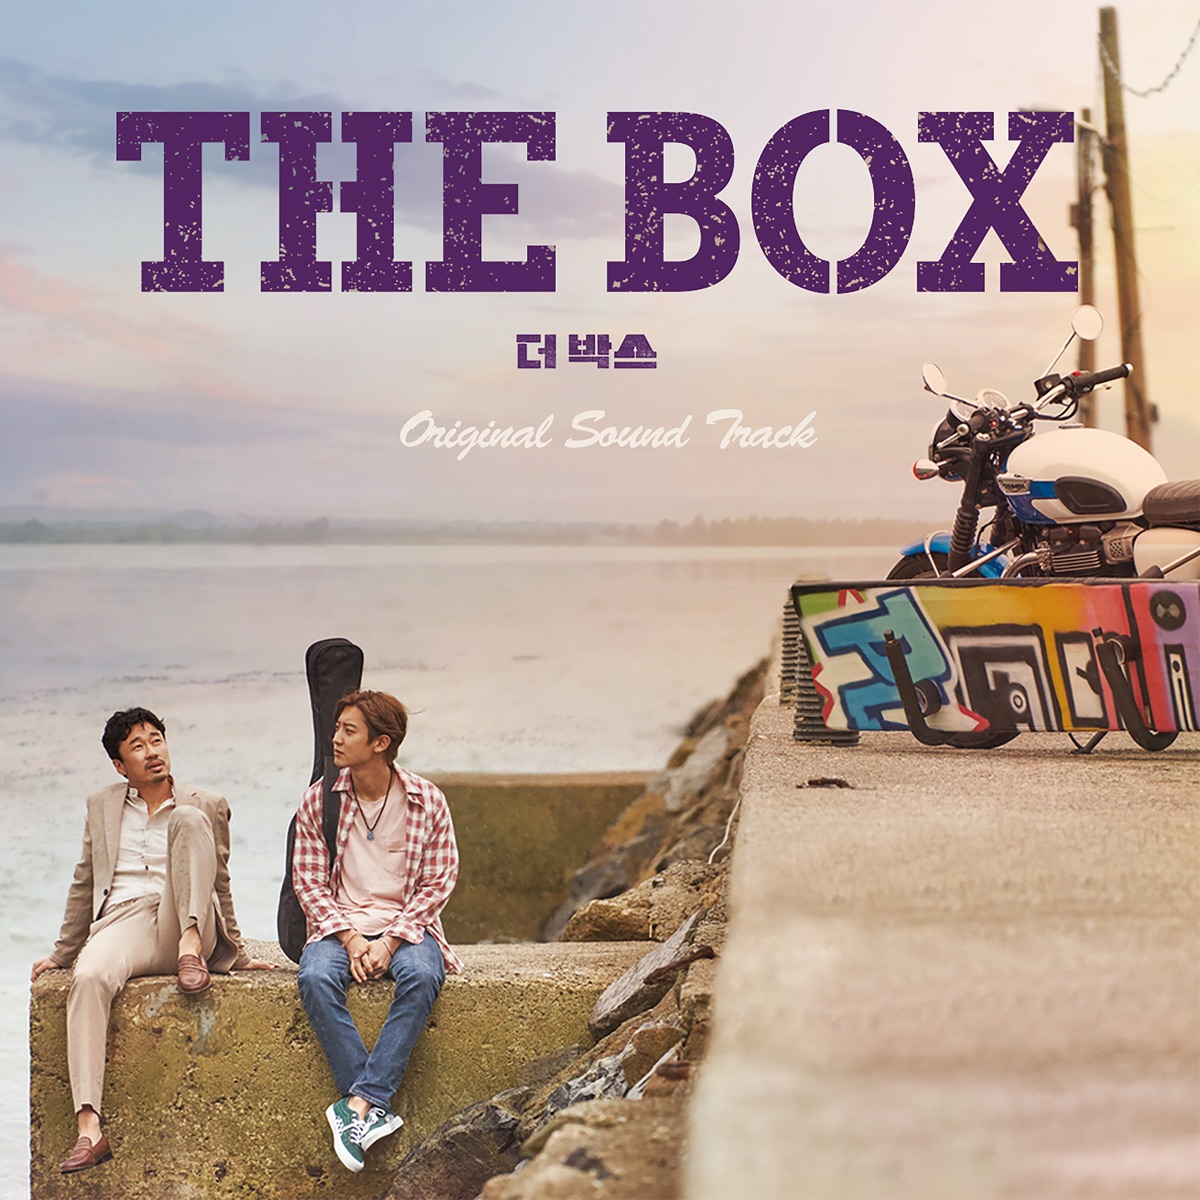 『CHANYEOL (EXO) - Without You 歌詞』収録の『THE BOX (Original Soundtrack)』ジャケット